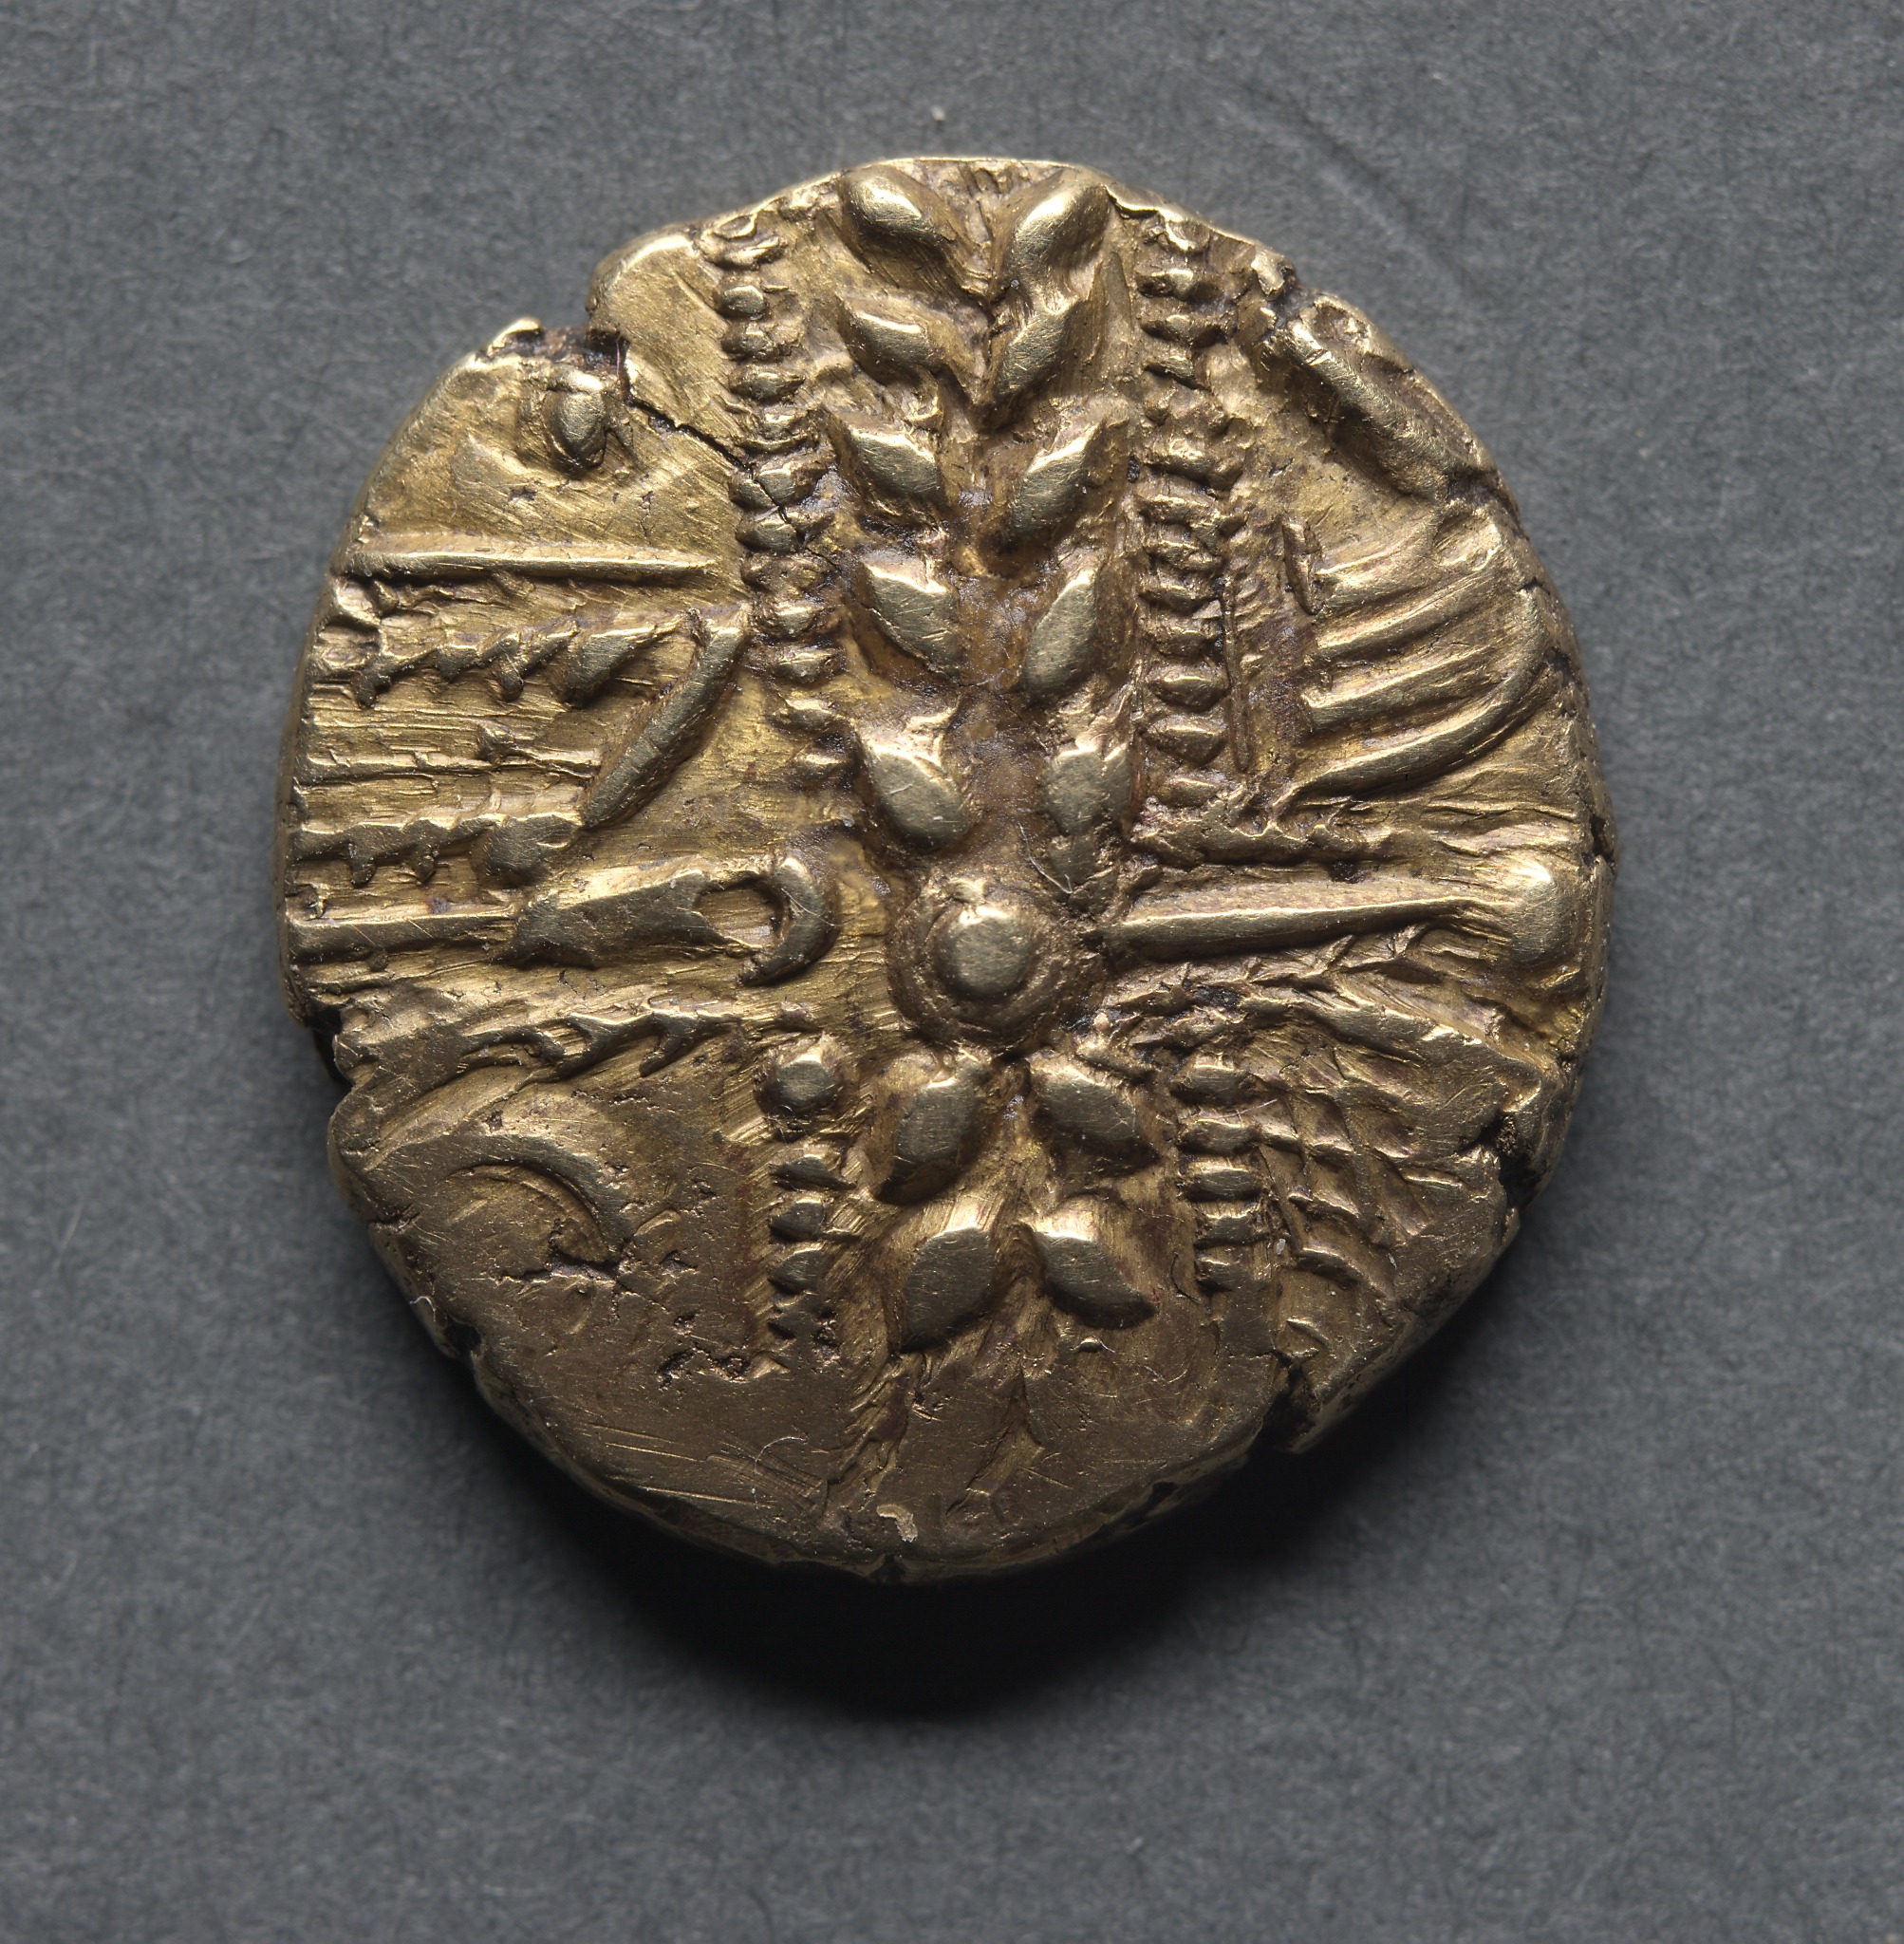 Stater: Wreath, Cloak and Crescents (obverse)